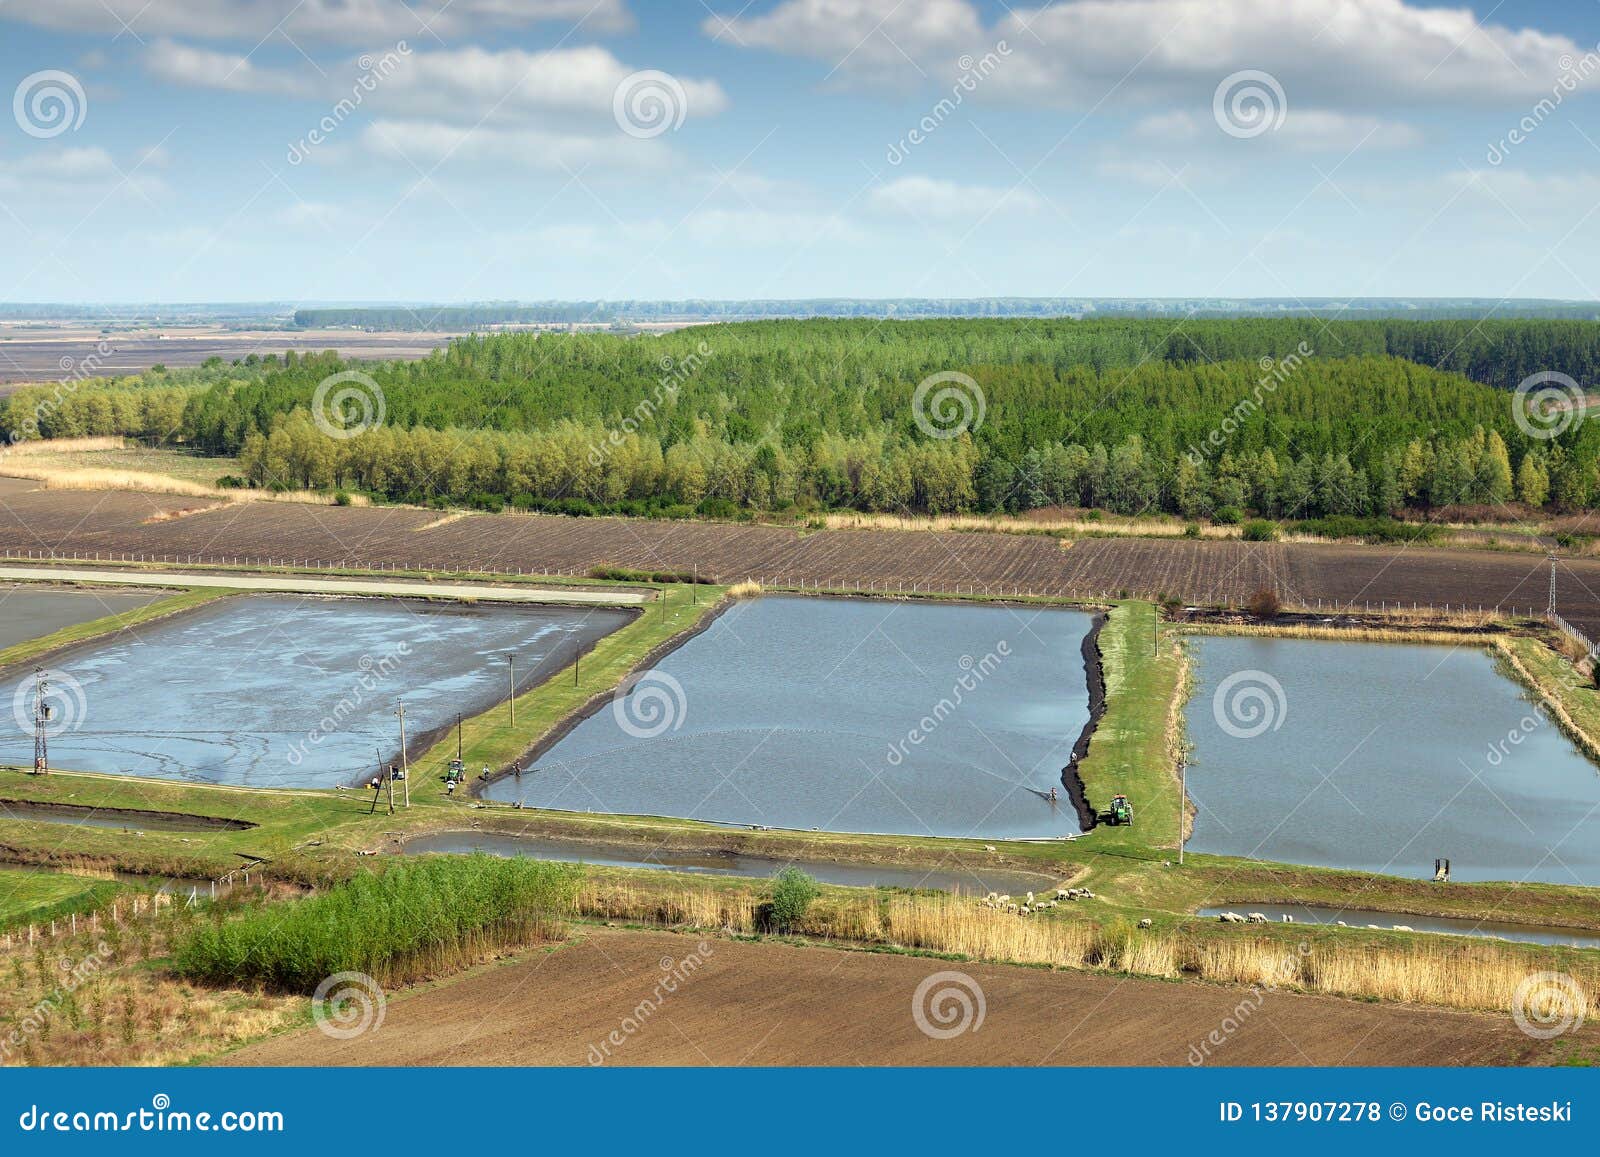 Fish Pond Hatchery Agriculture Rural Stock Photo - Image of business,  industrial: 137907278